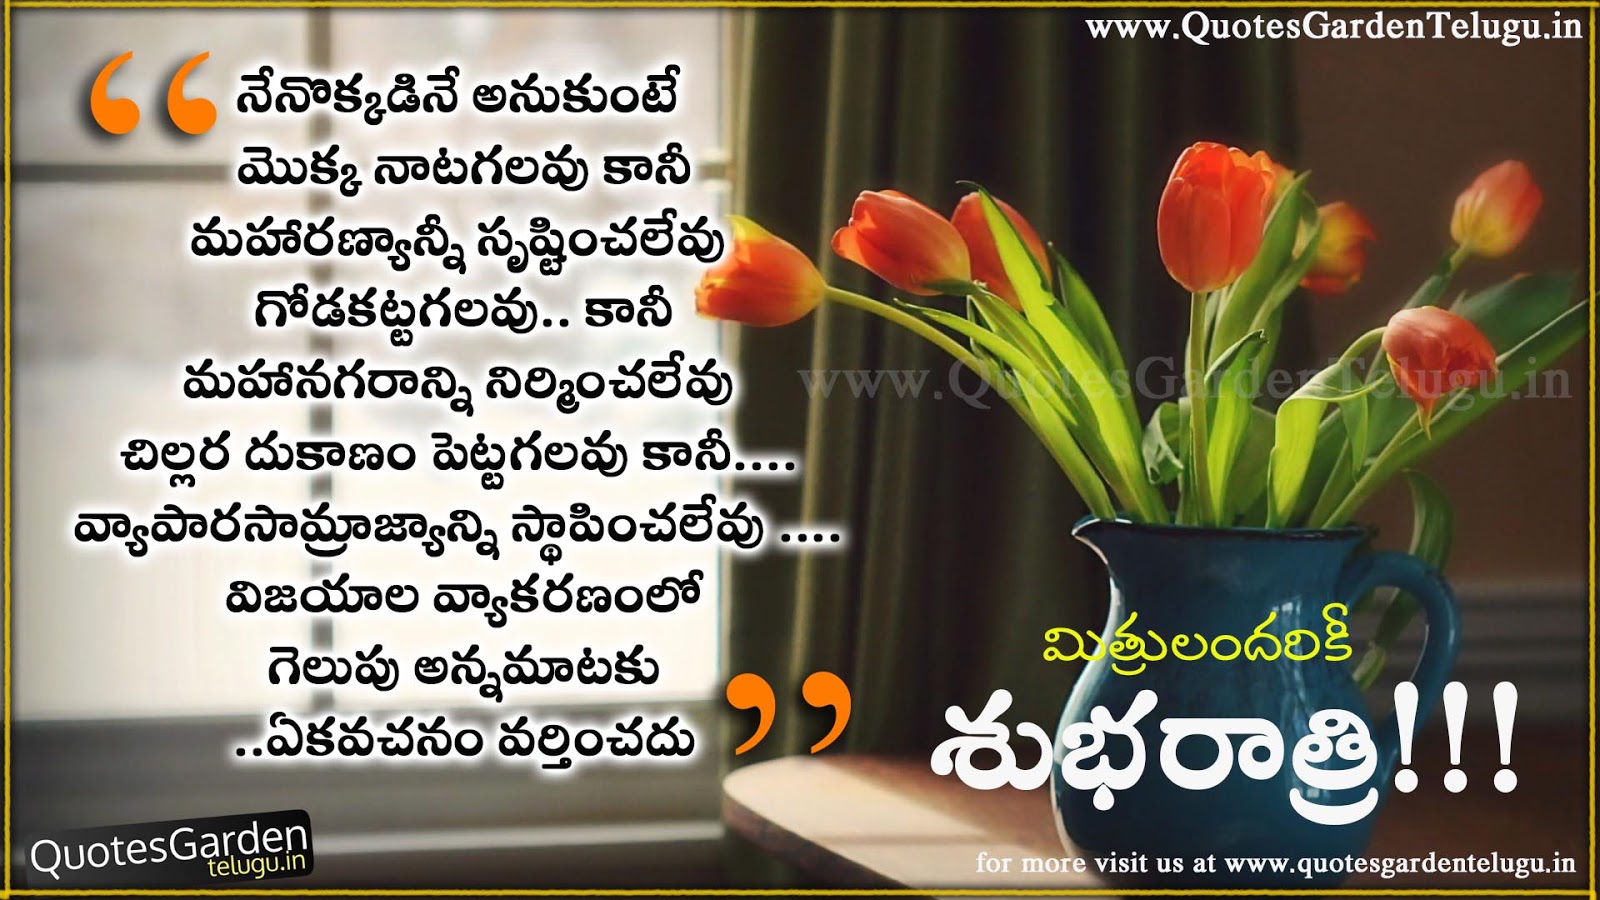 Heart touching Telugu Life quotes for good night greetings